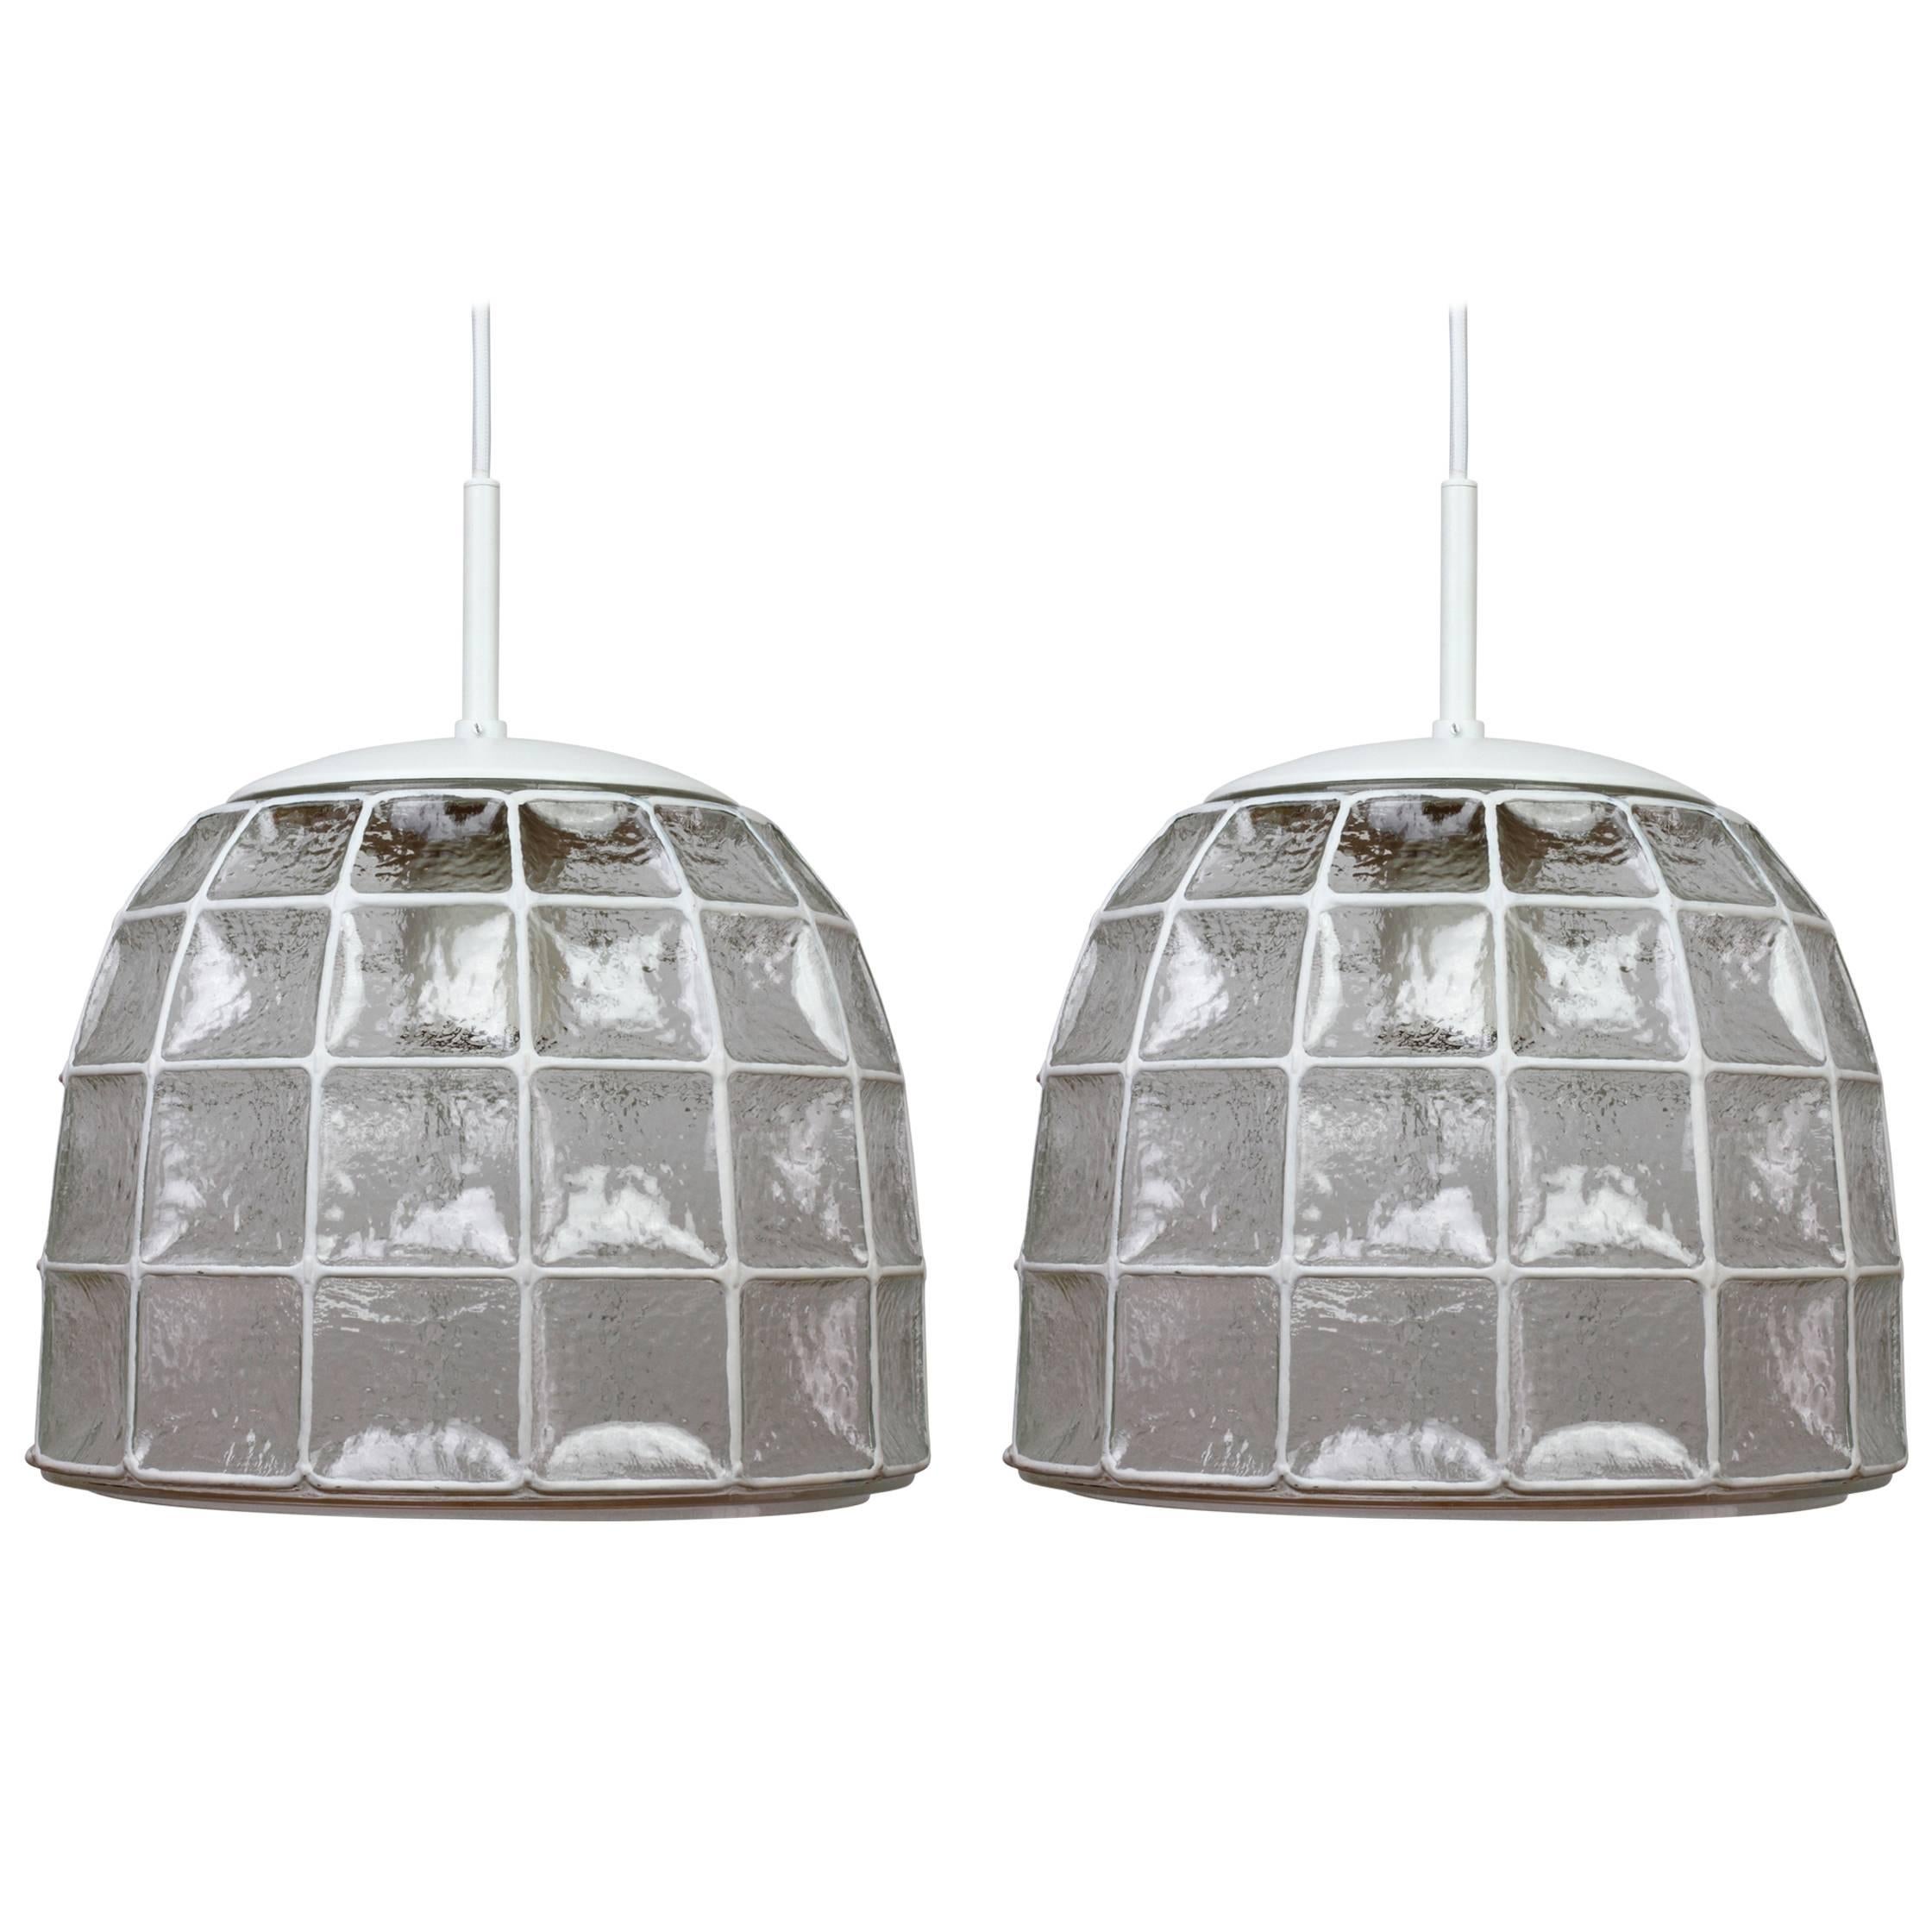 One of a Pair 1960s White Iron & Glass Honeycomb Bell Pendant Lights by Limburg For Sale